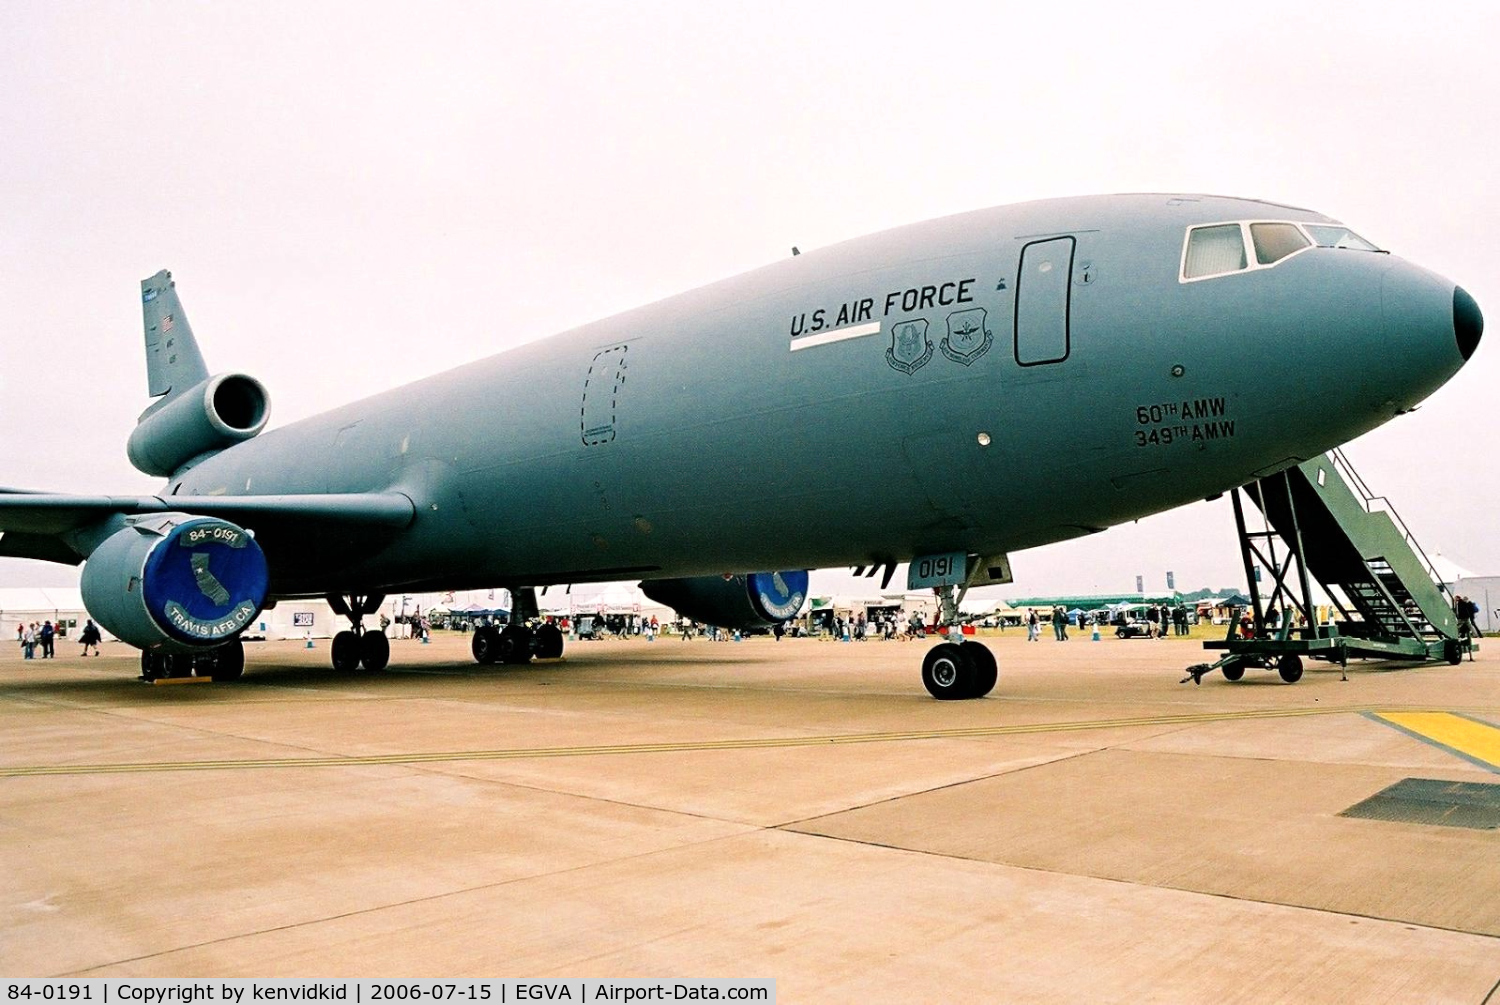 84-0191, 1984 McDonnell Douglas KC-10A Extender C/N 48230, US Air Force on static display at RIAT.